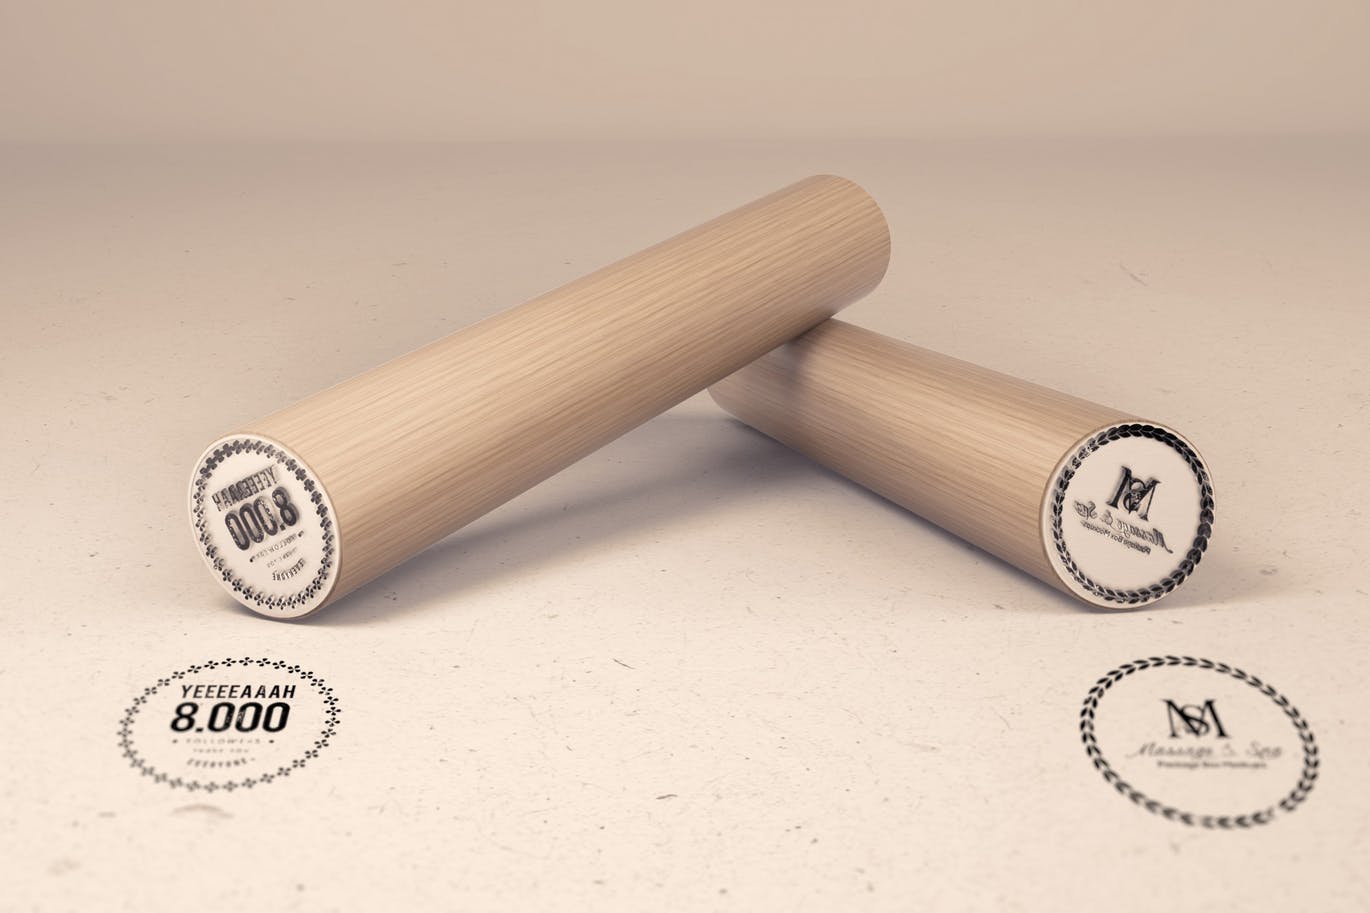 A long rubber stamp mockup templates